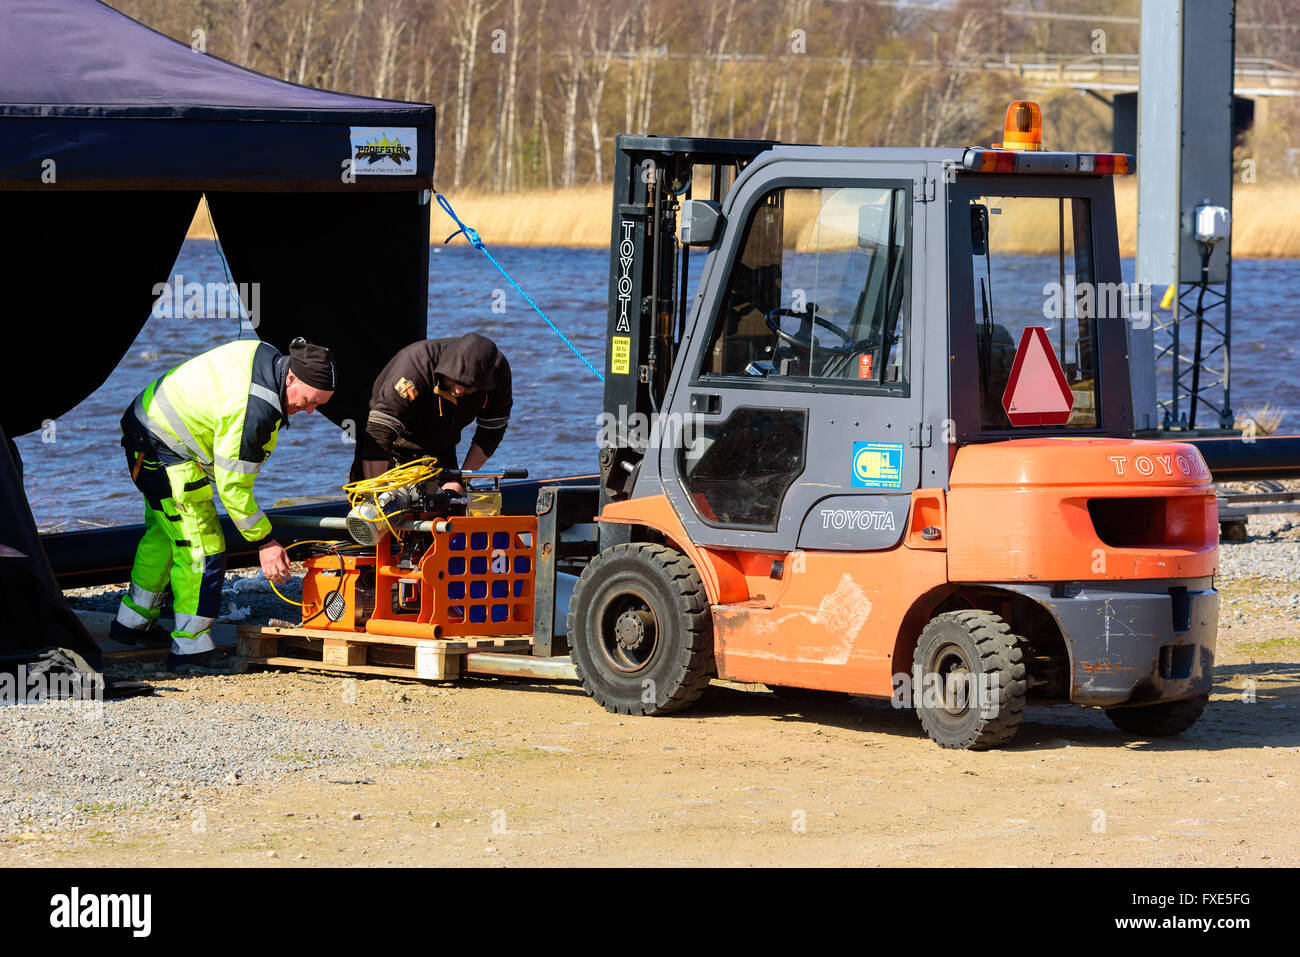 Karlskrona, Sweden - April 7, 2016: Assembly of underwater sewage pipeline in public area. Here workers are loading a pallet for Stock Photo